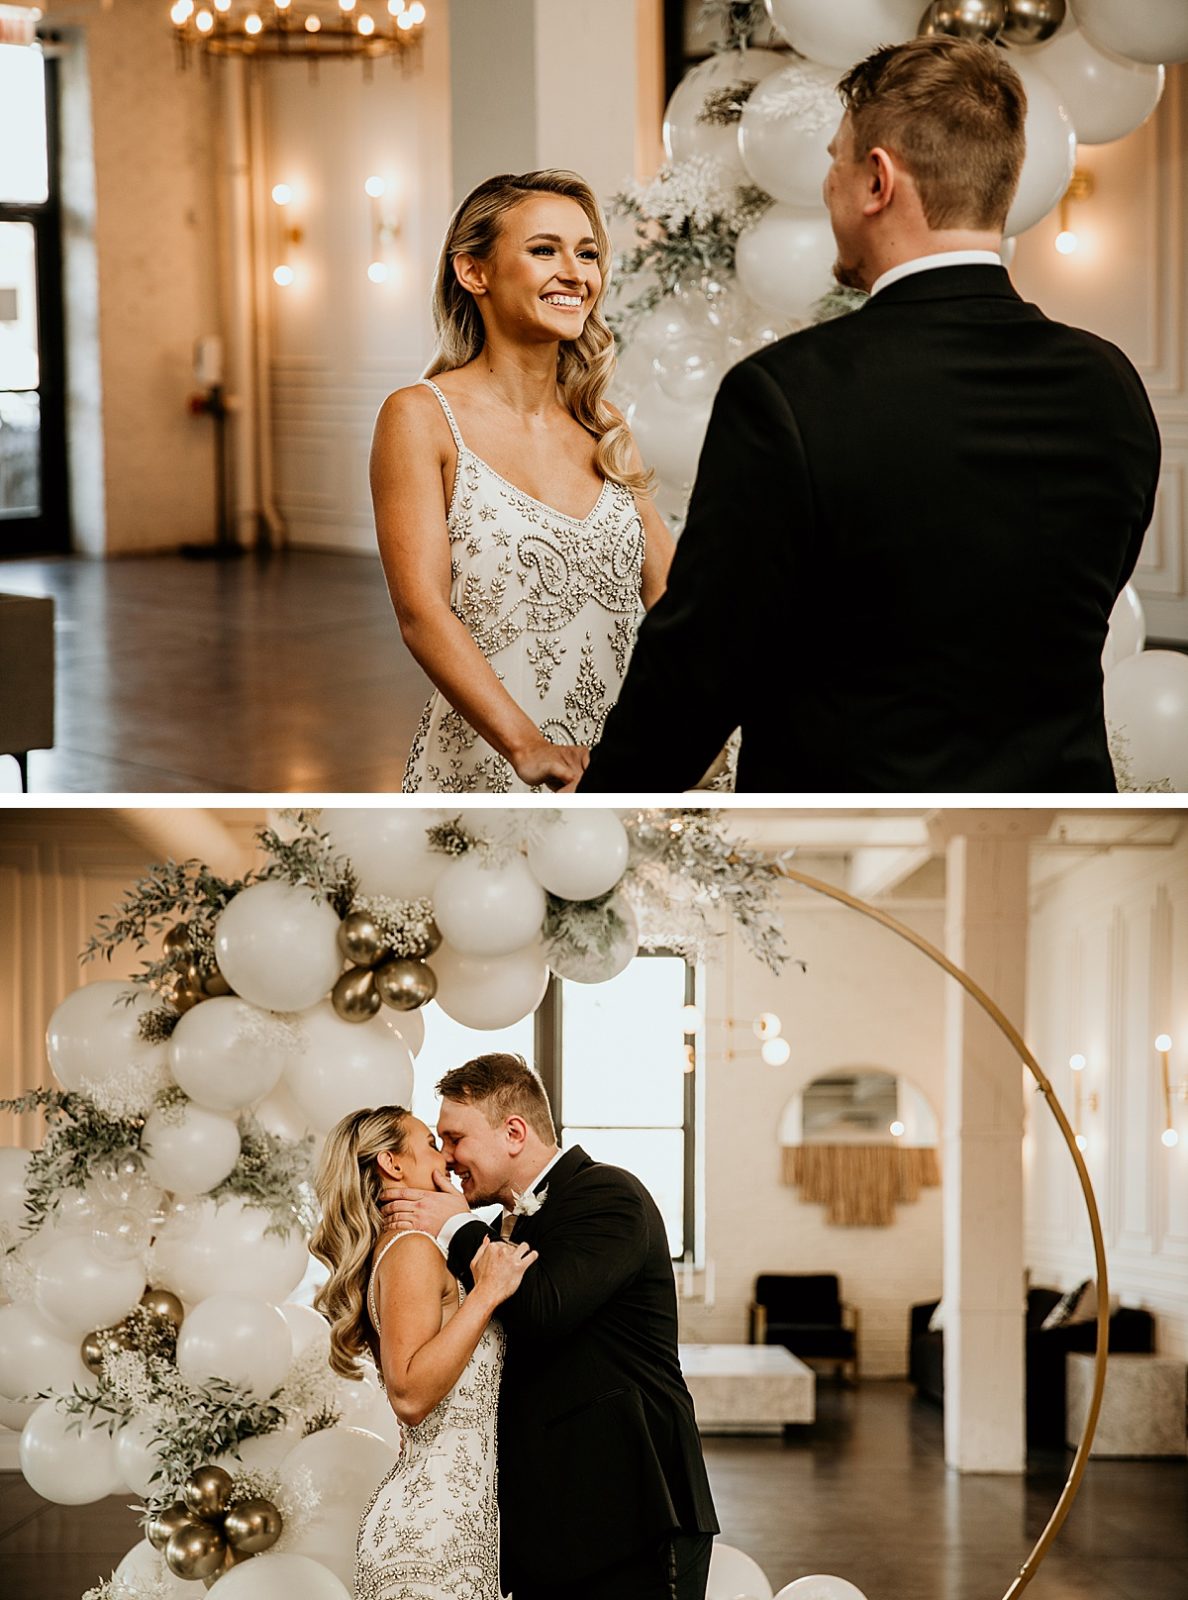 2 photos of a ceremony with a circle balloon wedding arch. the first image is of the bride smiling at the groom and the second is the newlyweds kissing